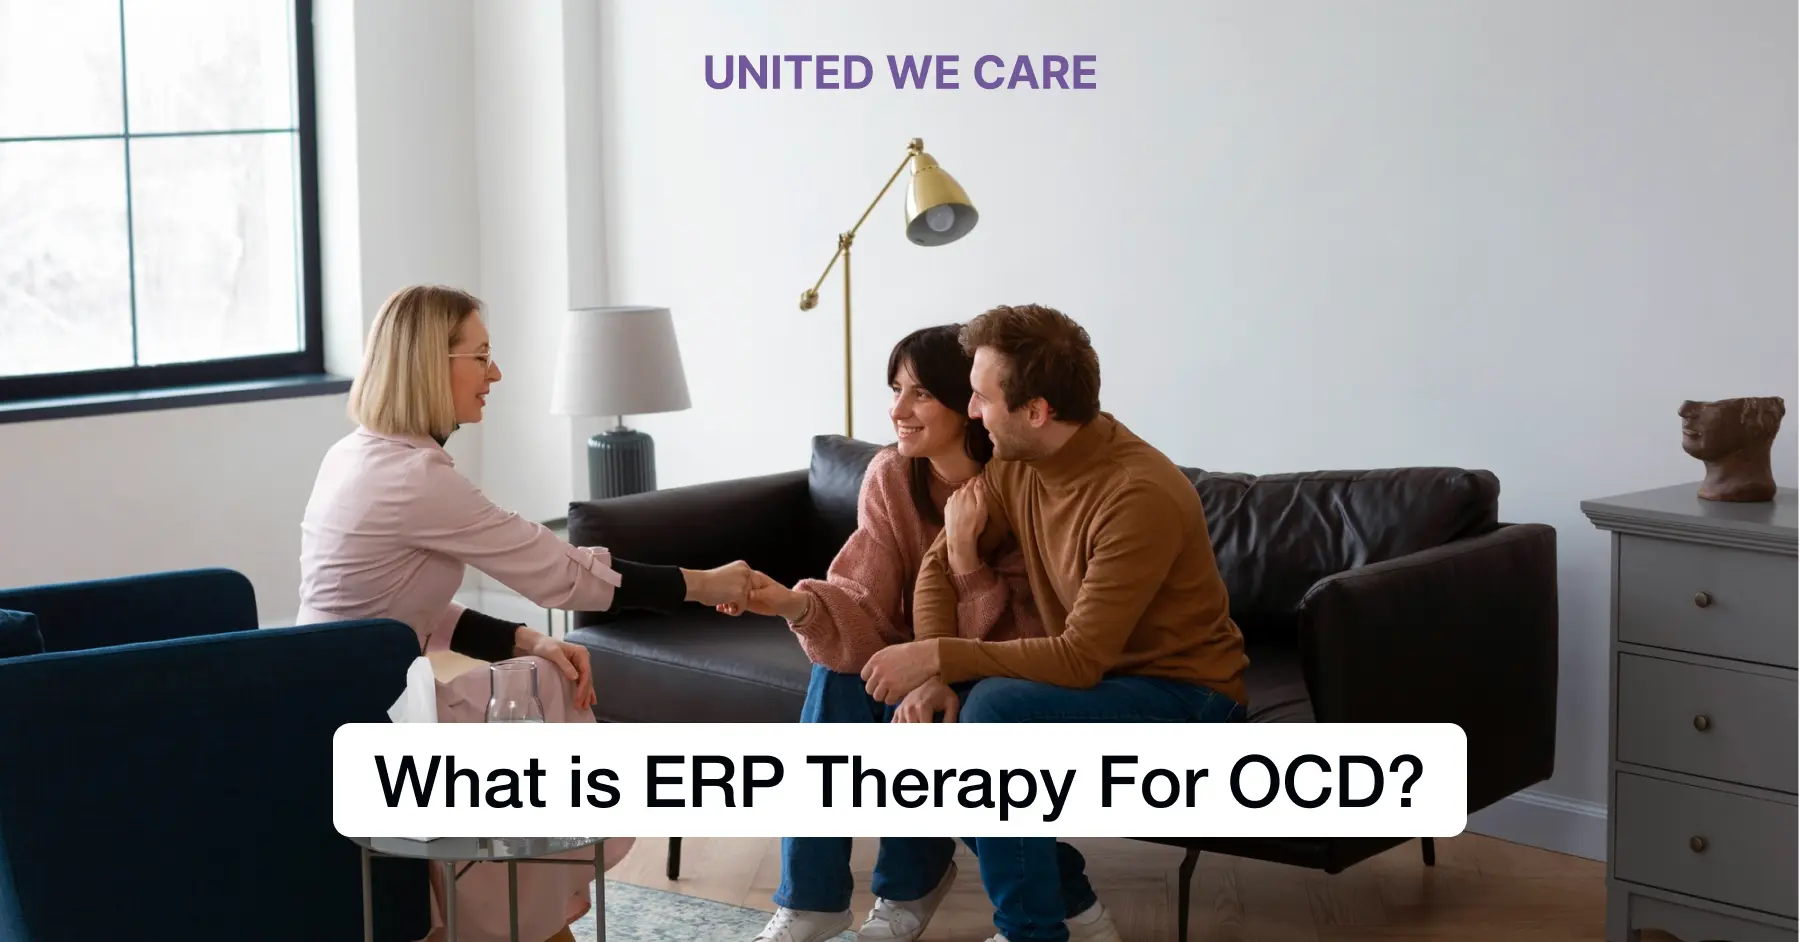 What is ERP Therapy For OCD?